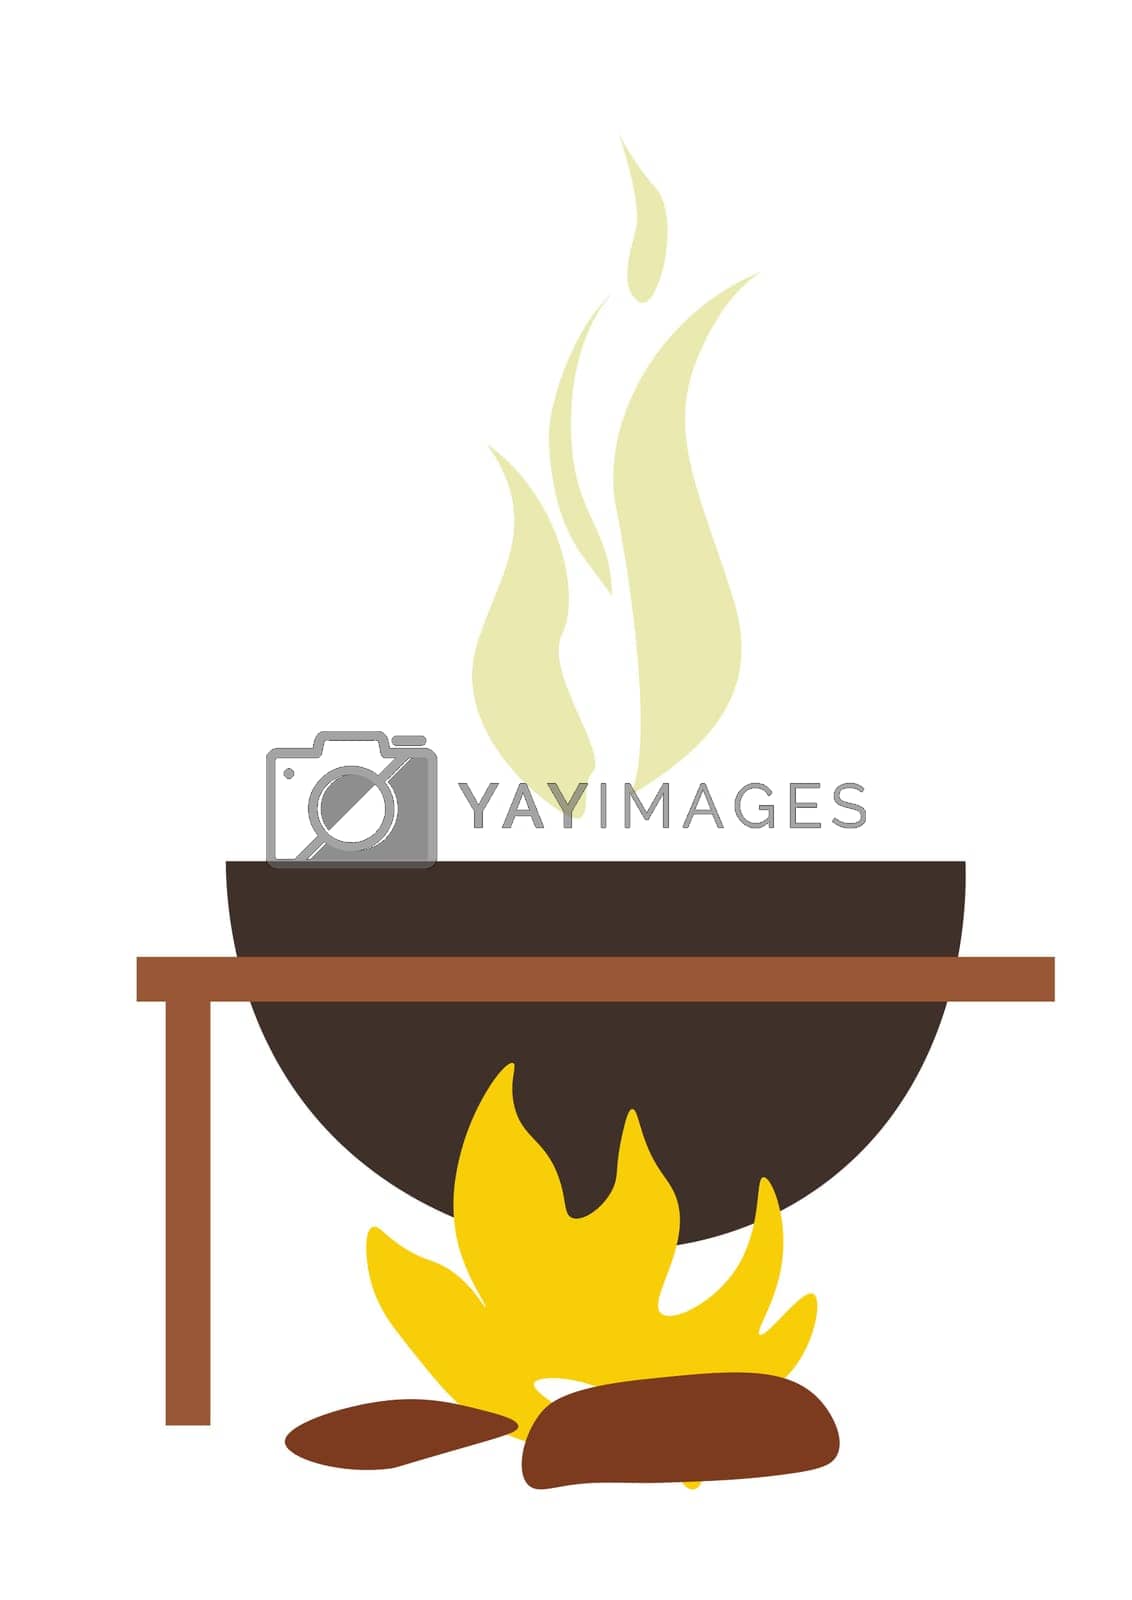 Royalty free image of Cauldron for cooking outdoors, trekking vector by Sonulkaster